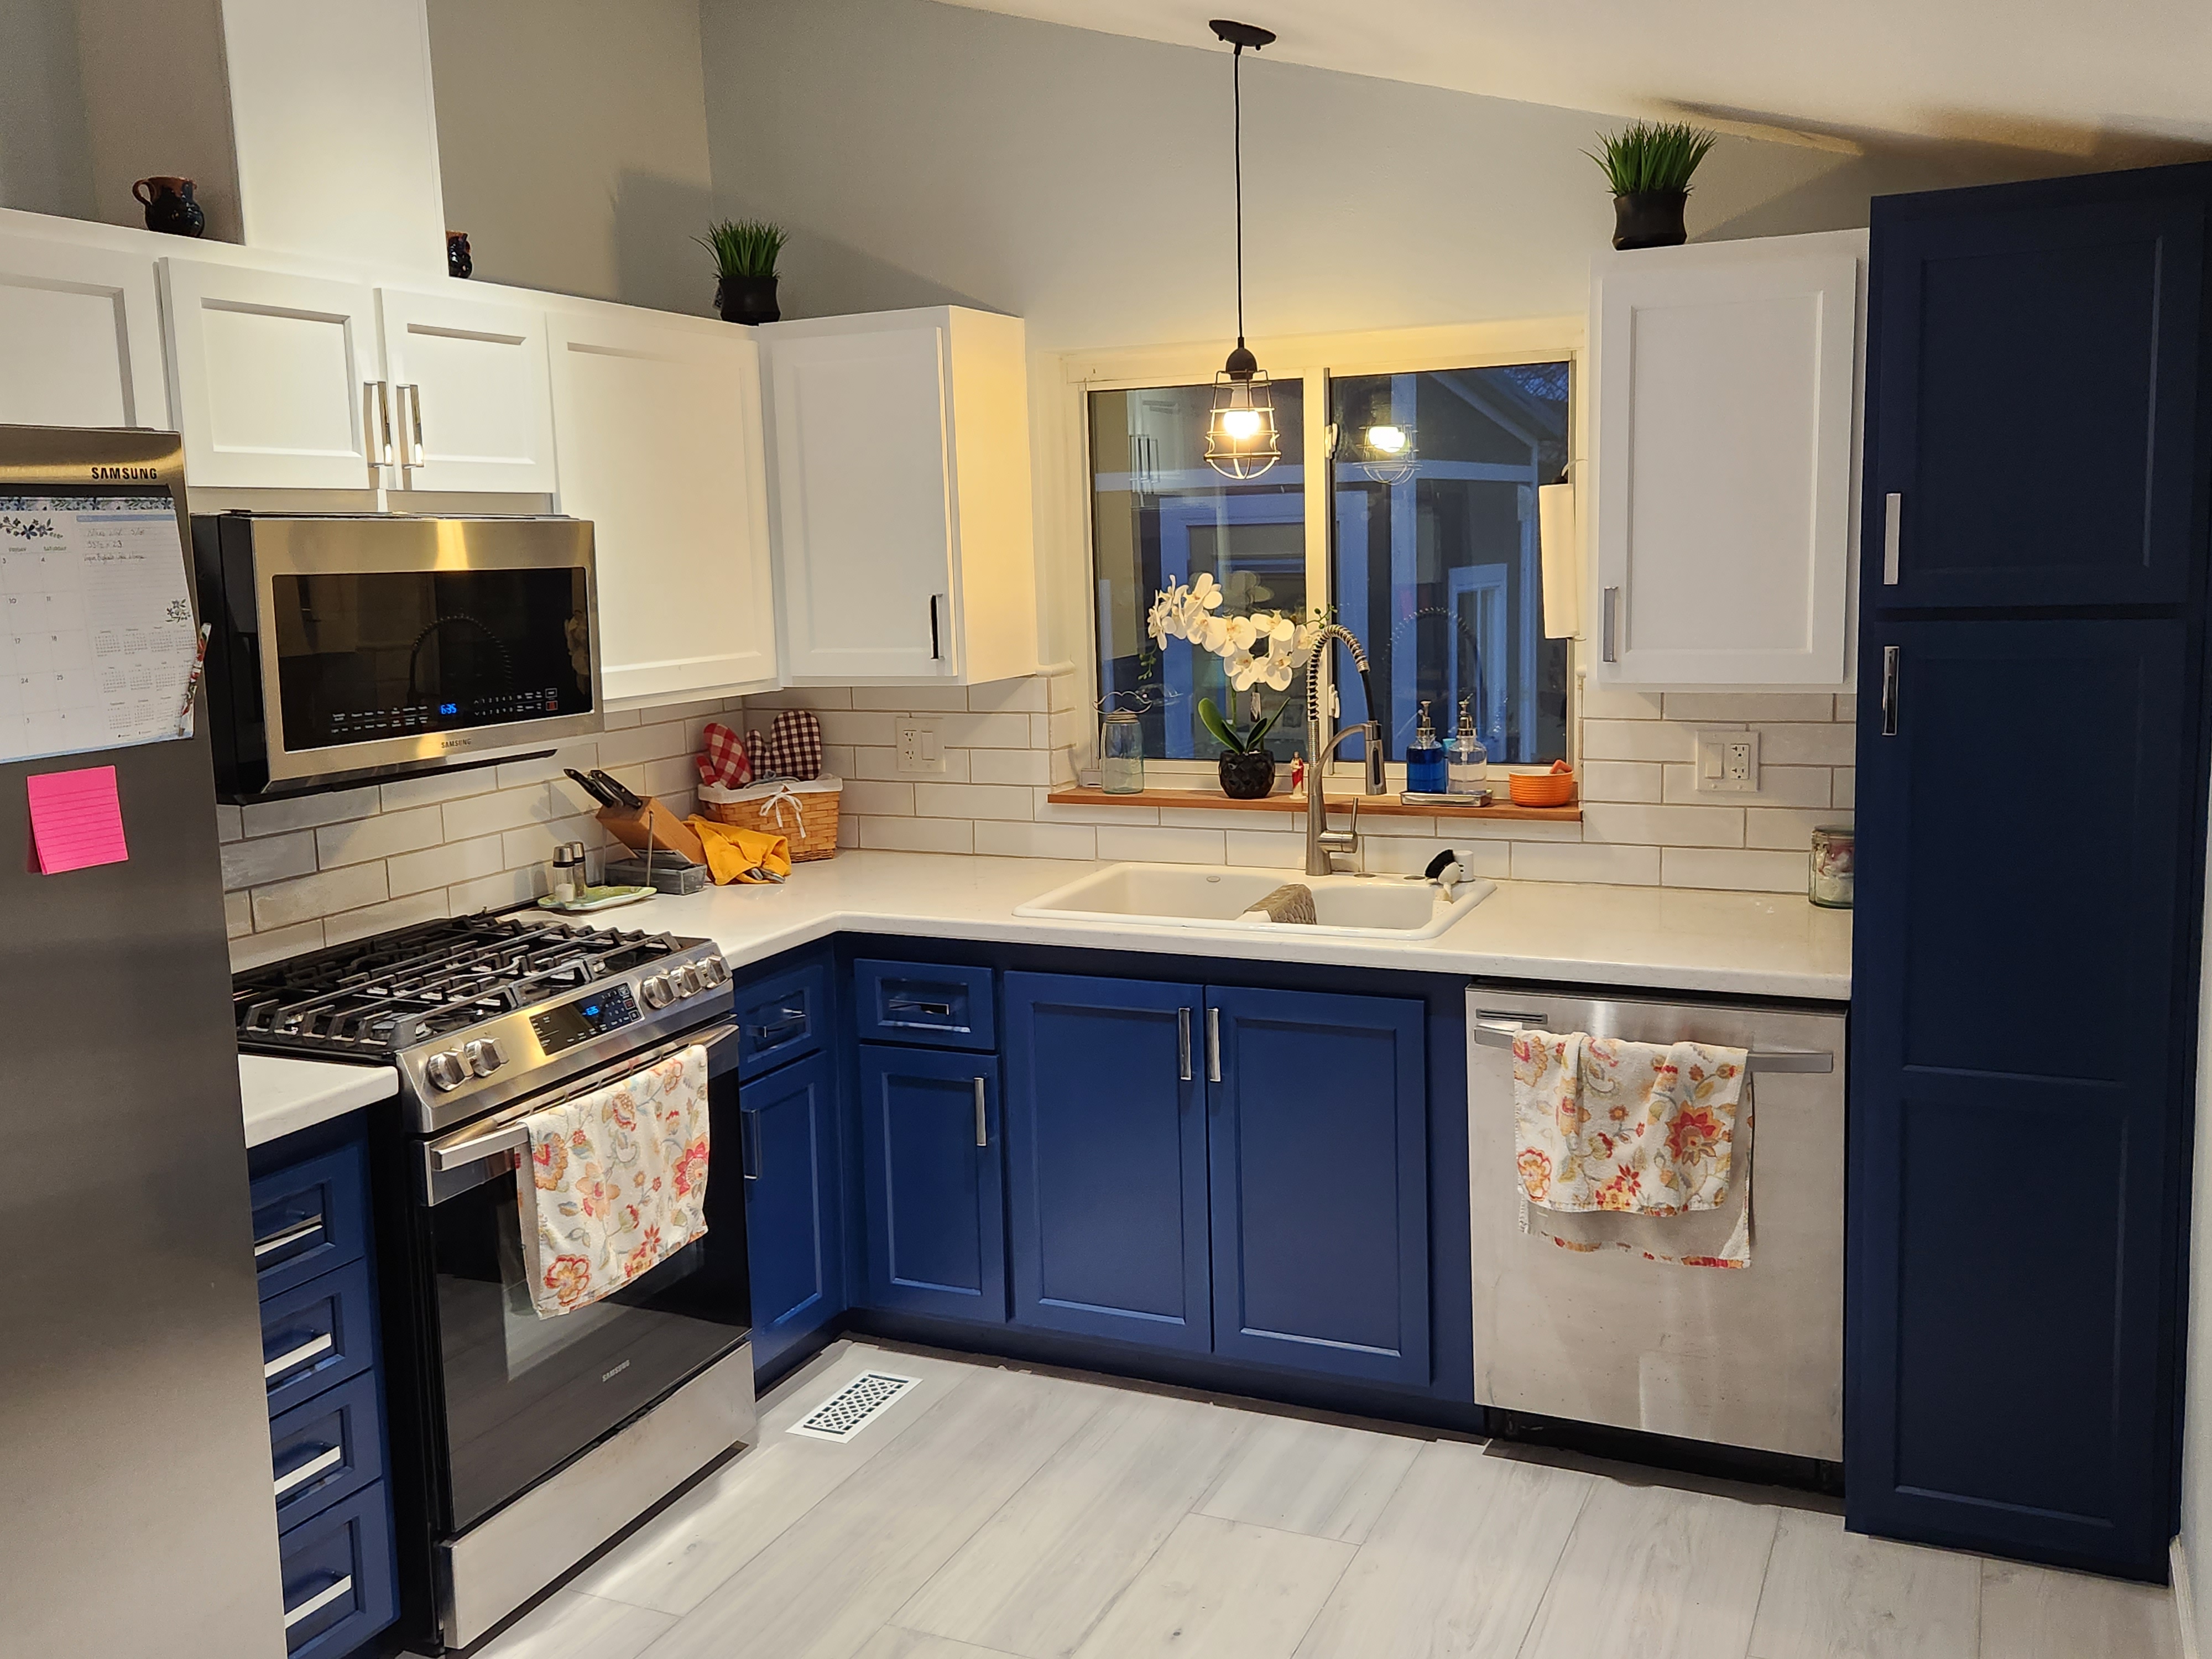 Veneer Kitchen Cabinets: Transform Your Space with Stylish Power